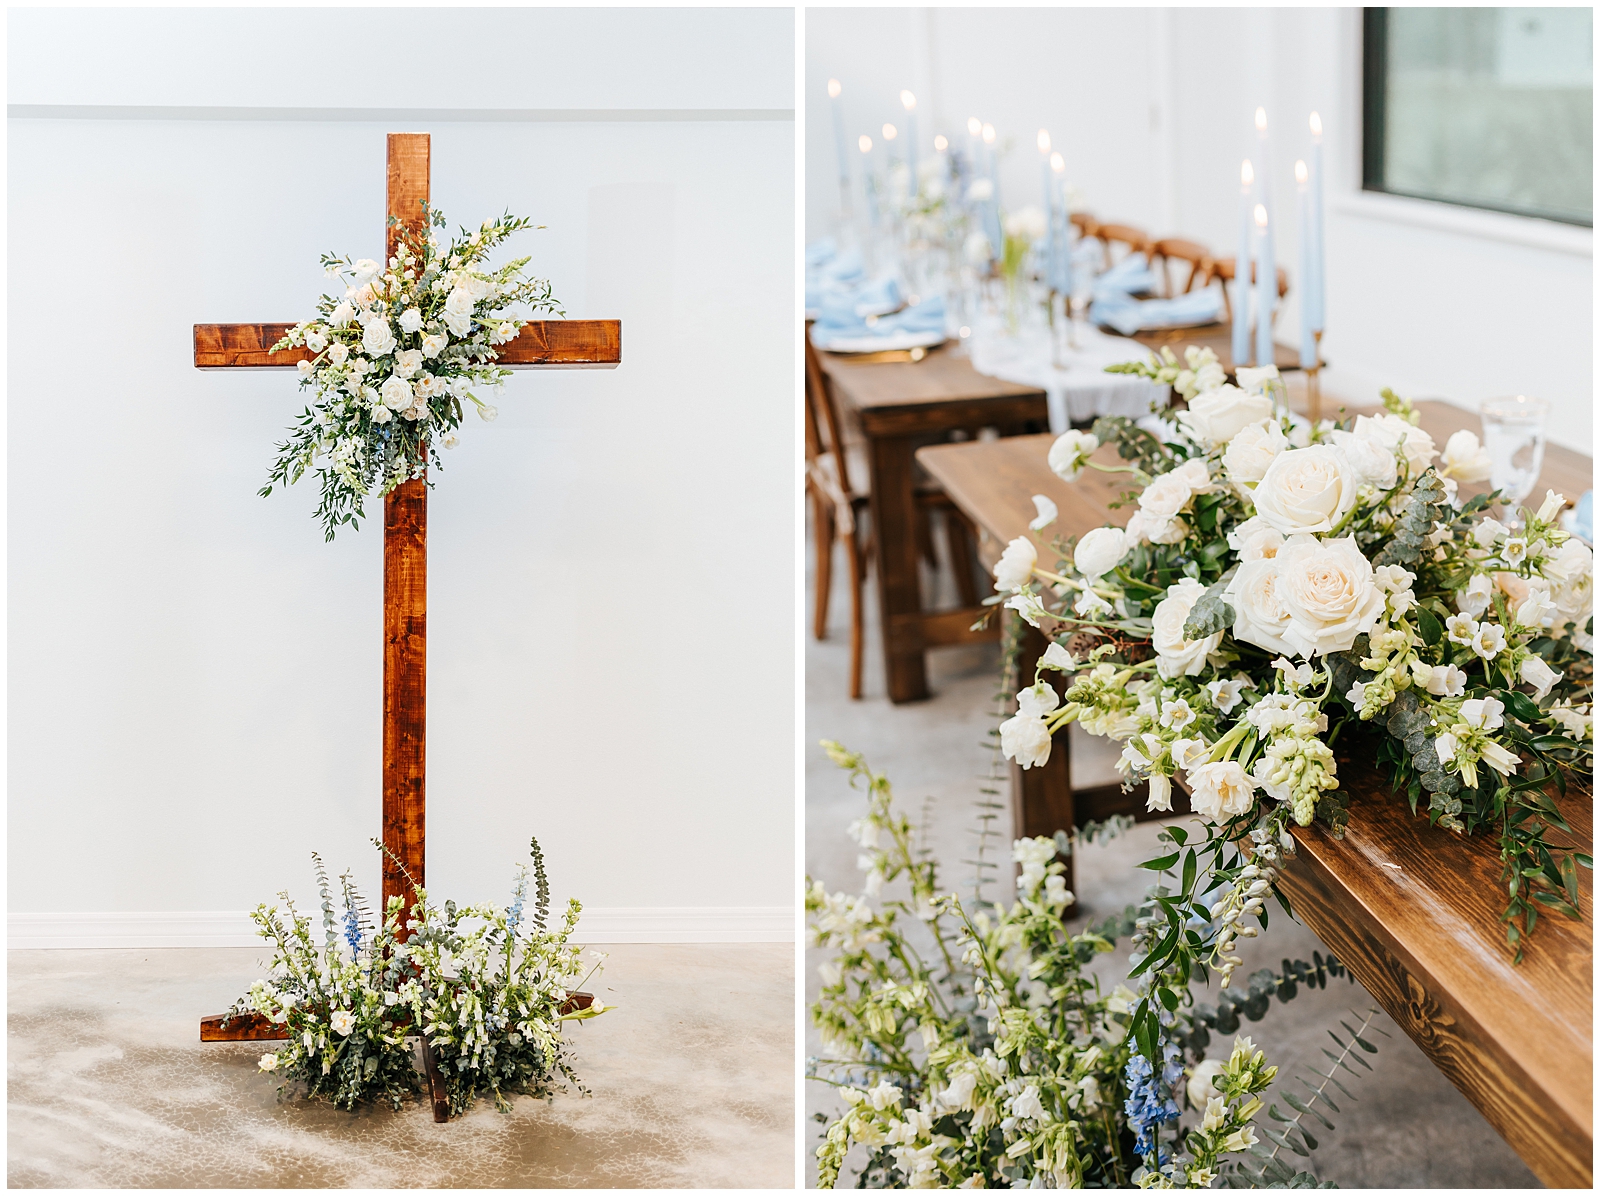 Wooden Cross for ceremony altar with floral installation and tablescape